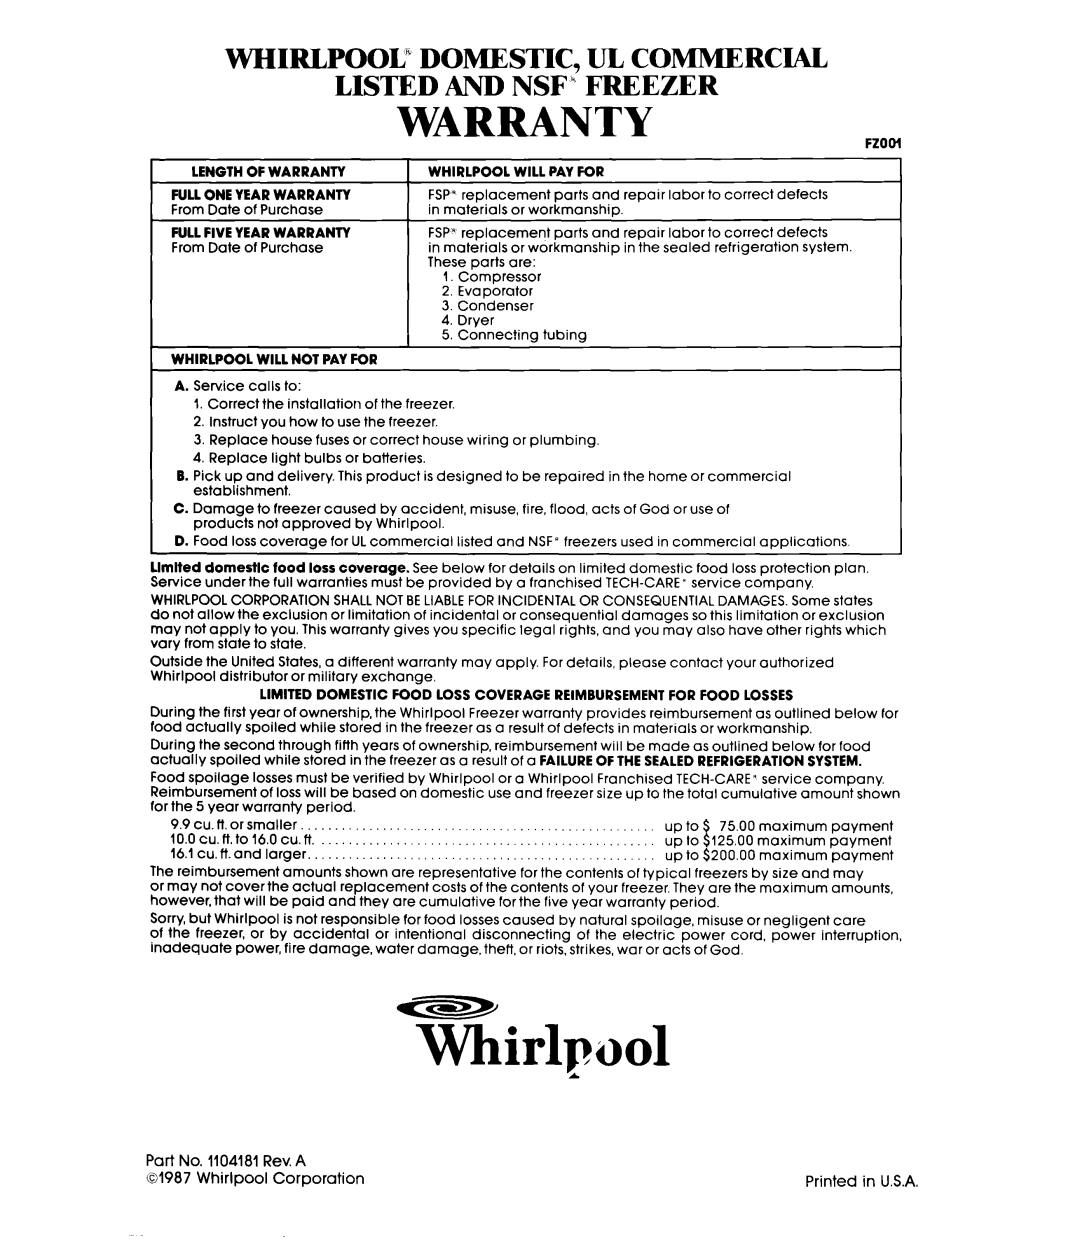 Whirlpool EVISOF manual Warranty, Whirlpool” Domestic, Ul Commercial, Listed And Nsf” Freezer 